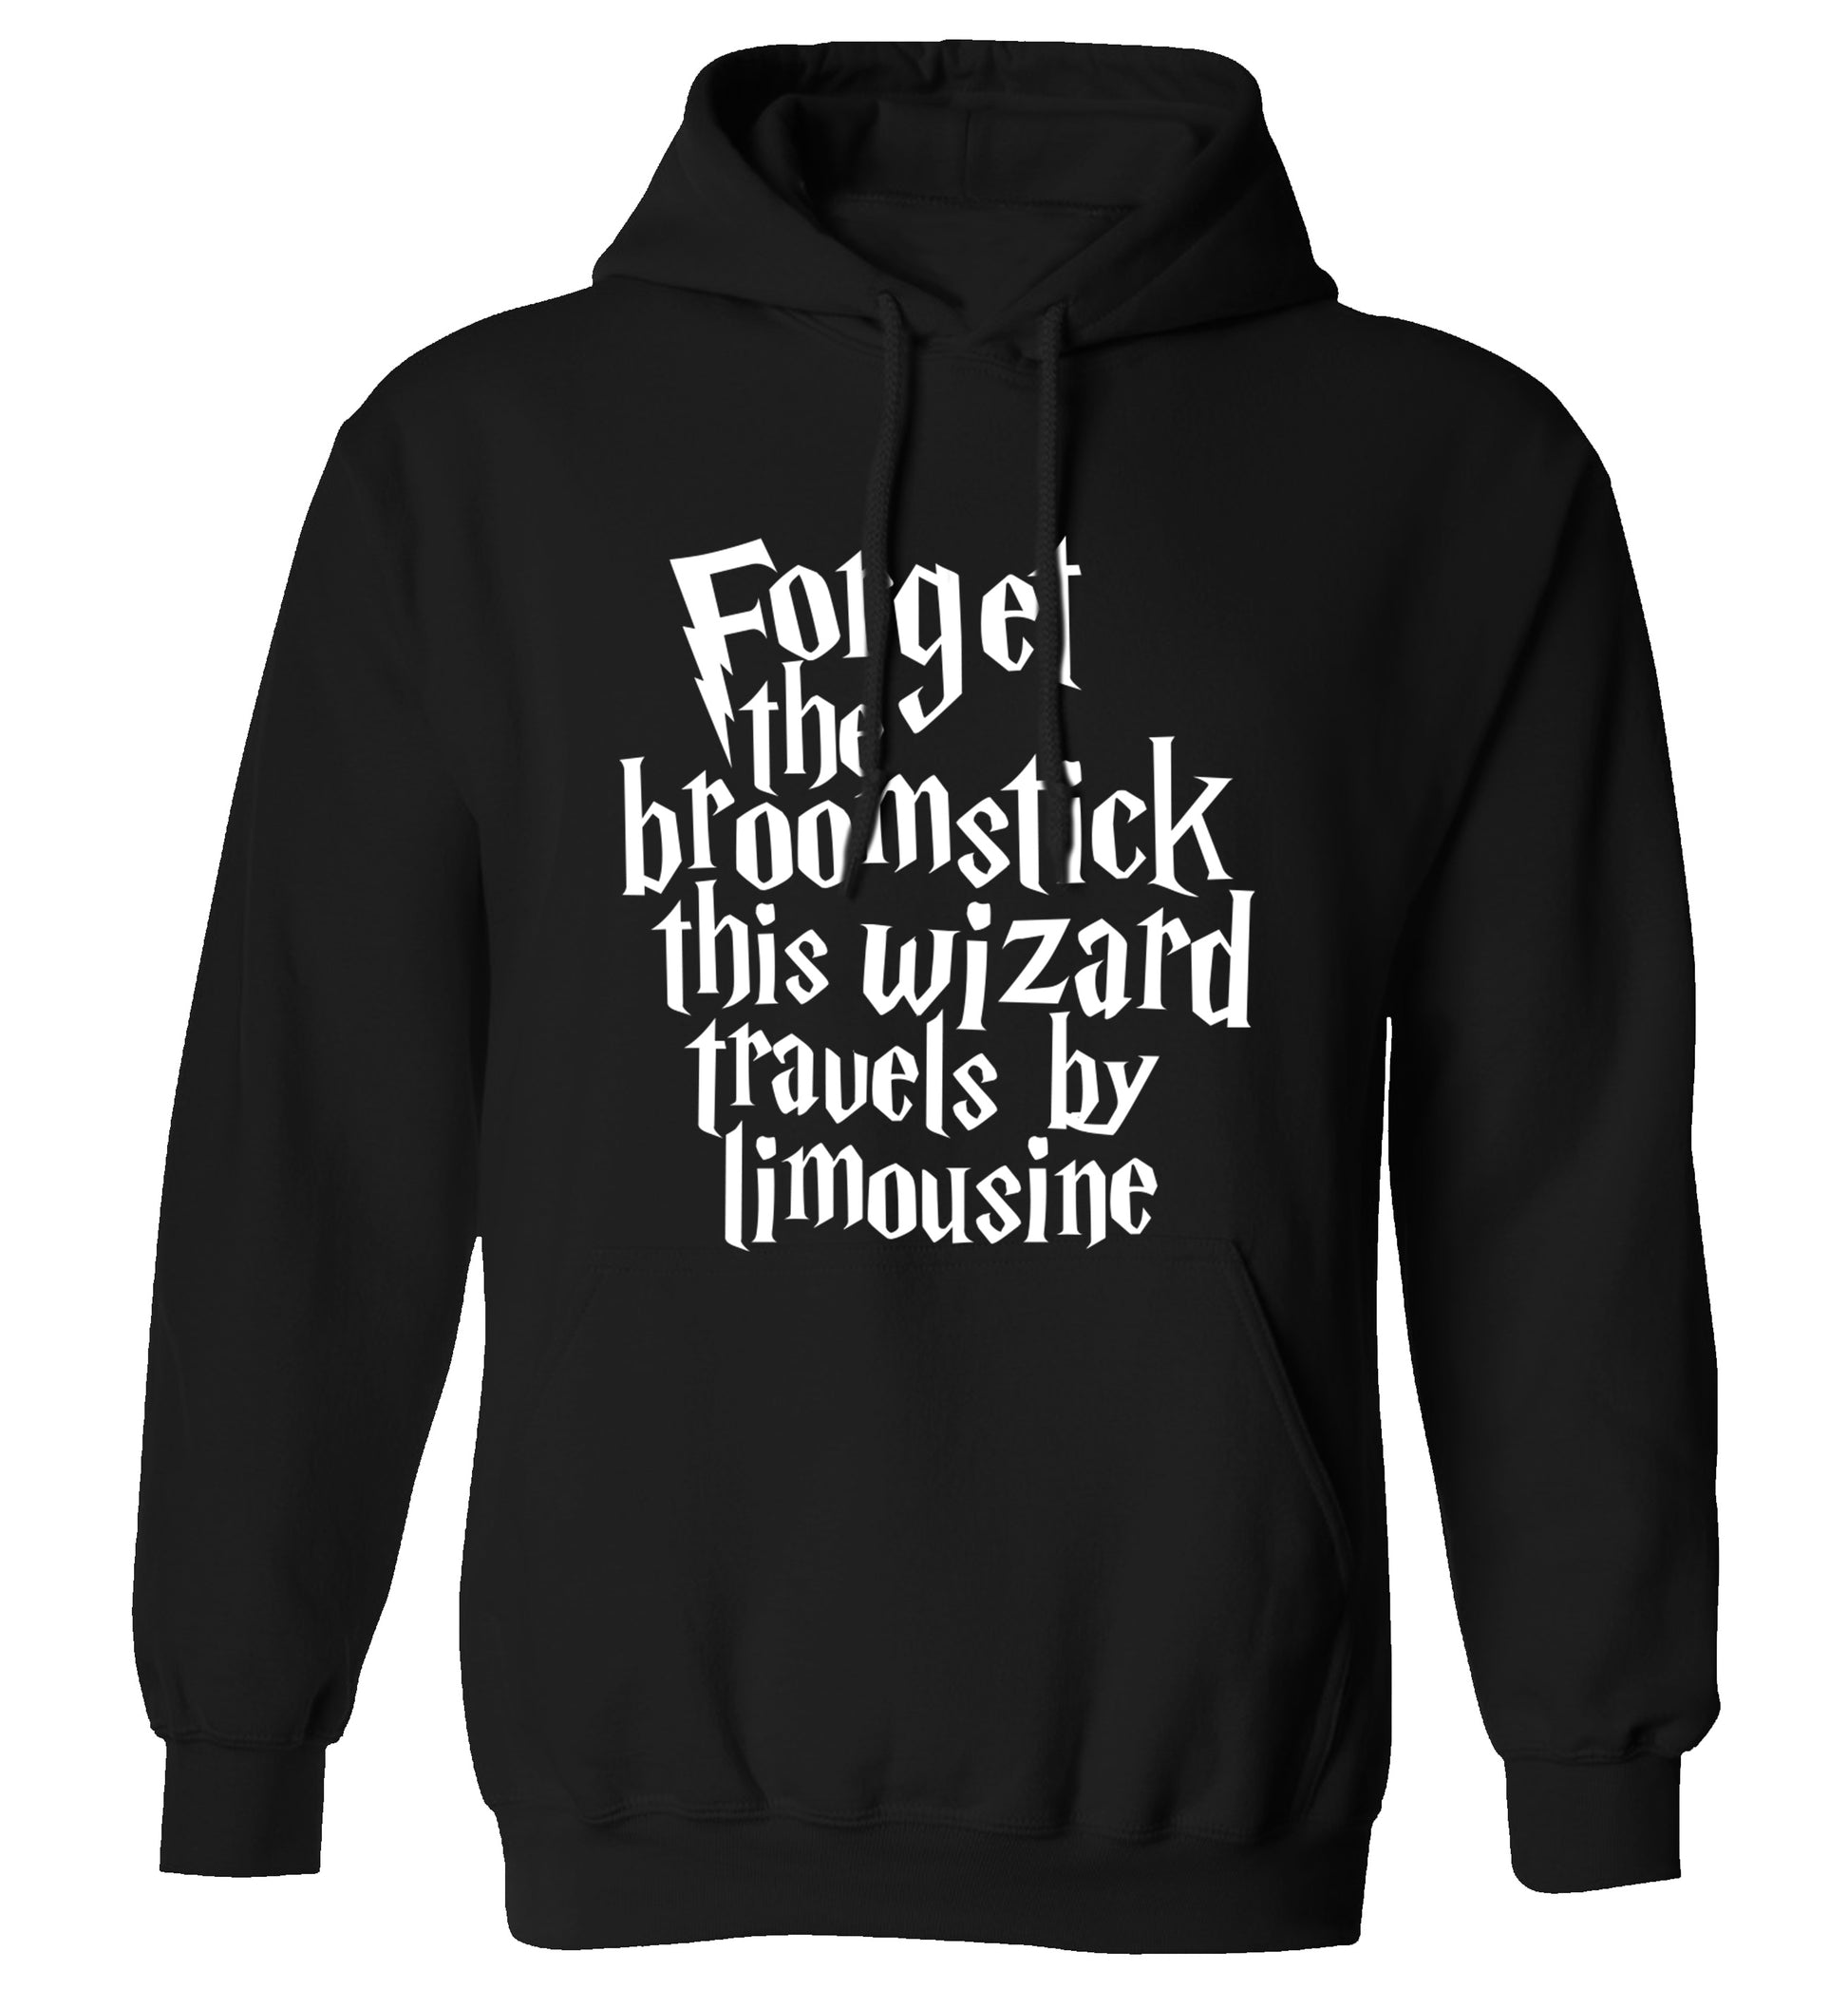 Forget the broomstick this wizard travels by limousine adults unisexblack hoodie 2XL